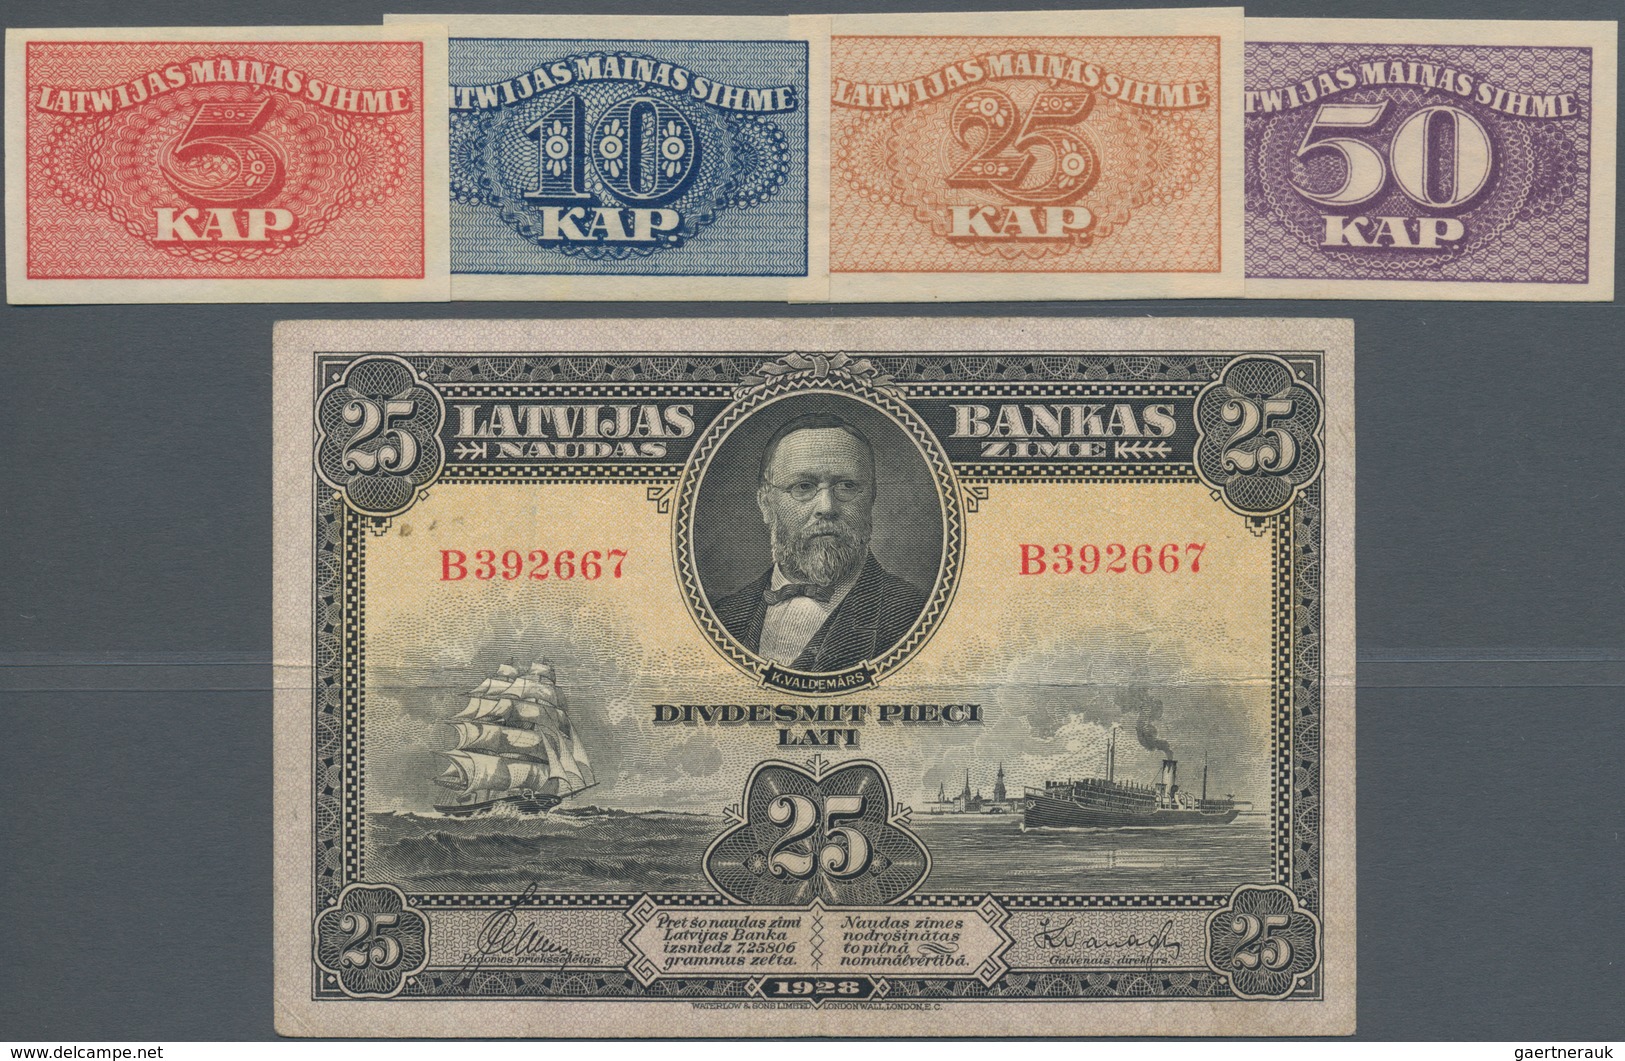 Latvia / Lettland: Nice Lot With 5 Banknotes Containing The Small Currency Issues Of 5, 10, 25 And 5 - Lettland